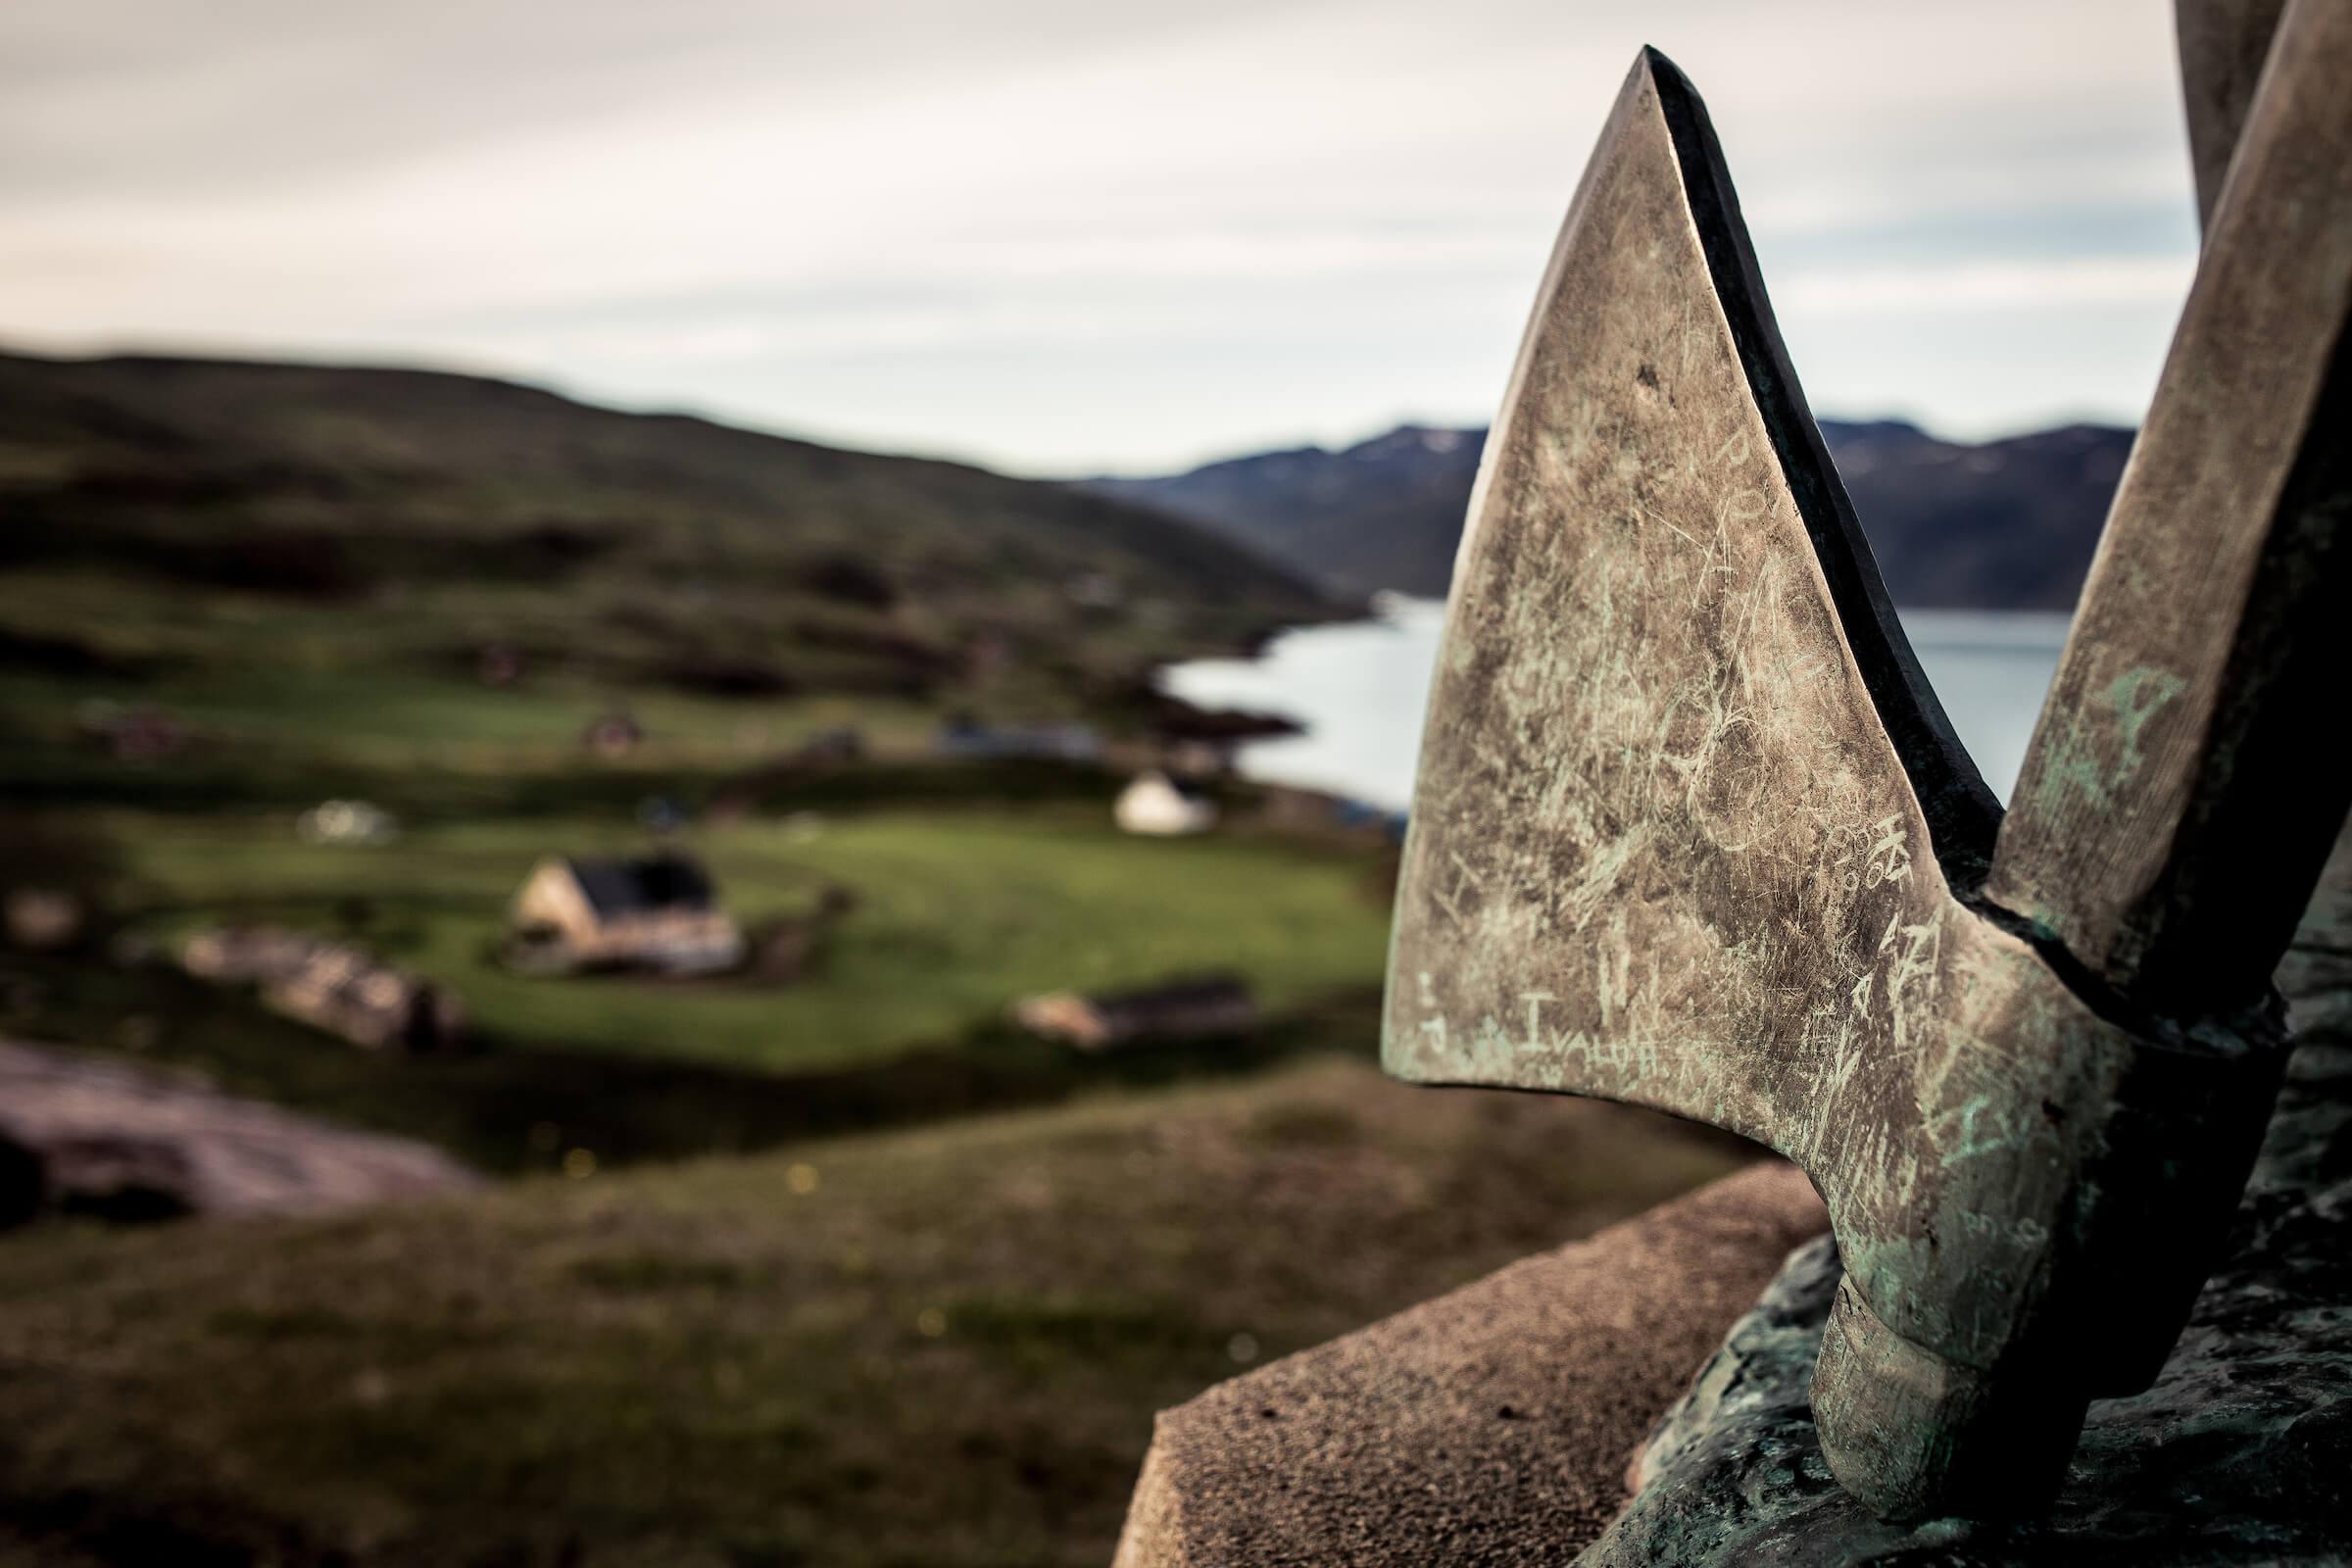 The axe of Leif Erikson - the statue overlooking Qassiarsuk in South Greenland, by Mads Pihl